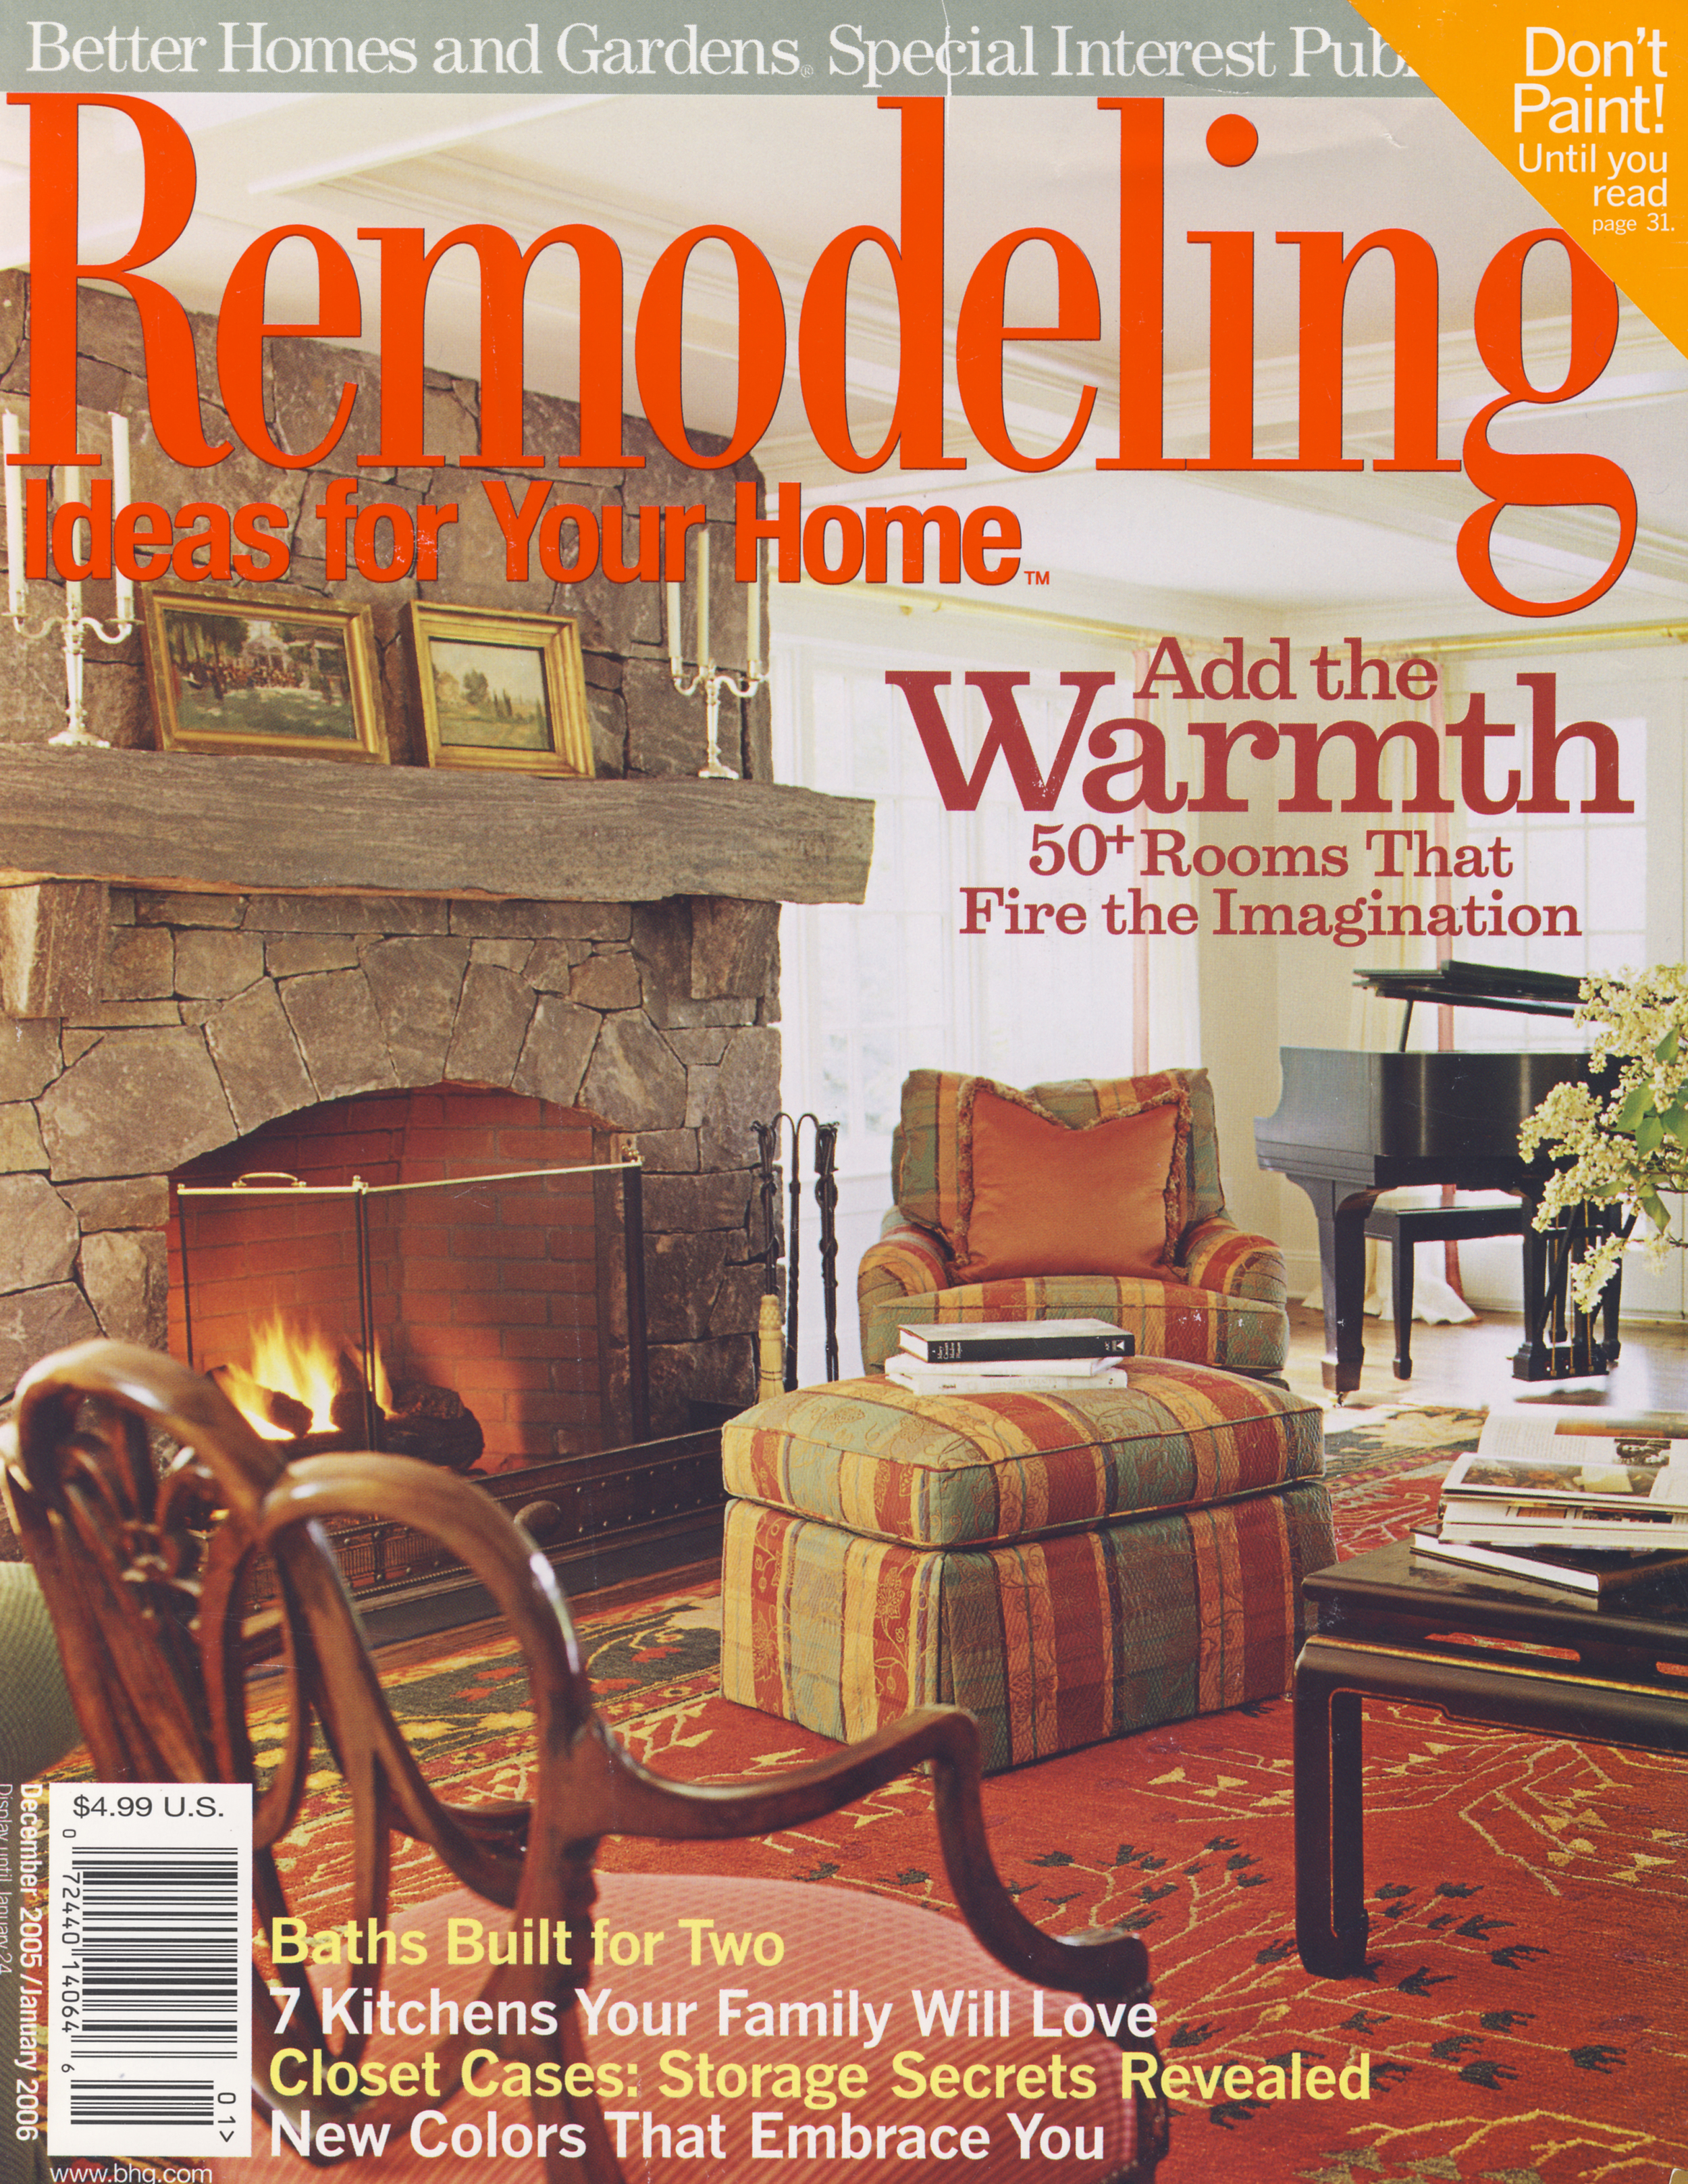 Fifth Street Better Homes & Gardens Special Remodeling Cover.jpg